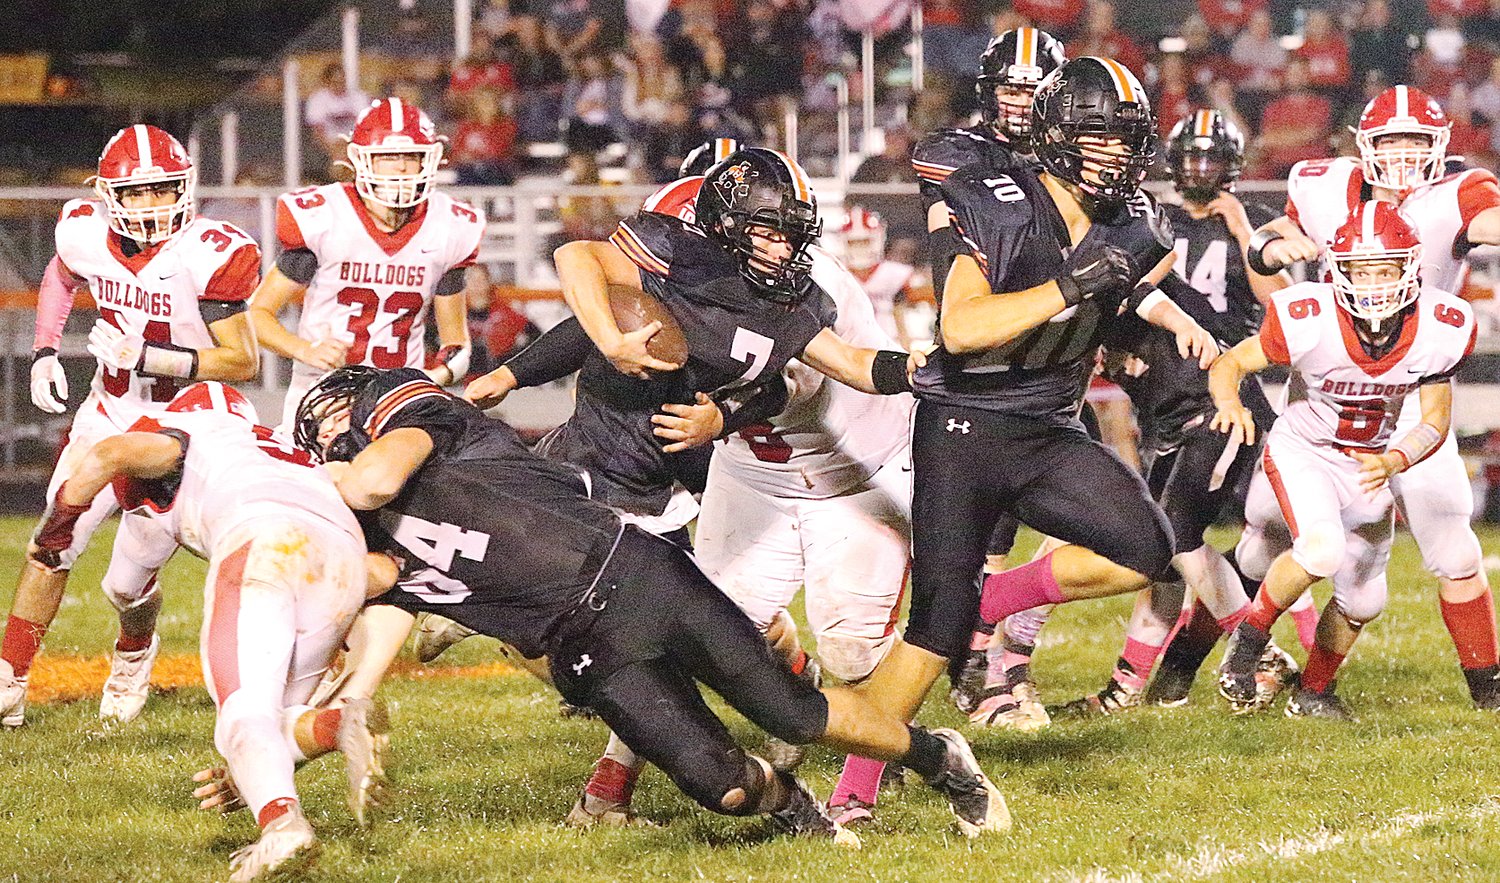 Running behind tackle Ian Malloy (#64) and guard Magnus Wells (#70), Hillsboro quarterback Zane Duff (#7) runs to daylight in the Toppers' 40-7 victory over Staunton on Friday evening, Oct. 8, at Sawyer Field.